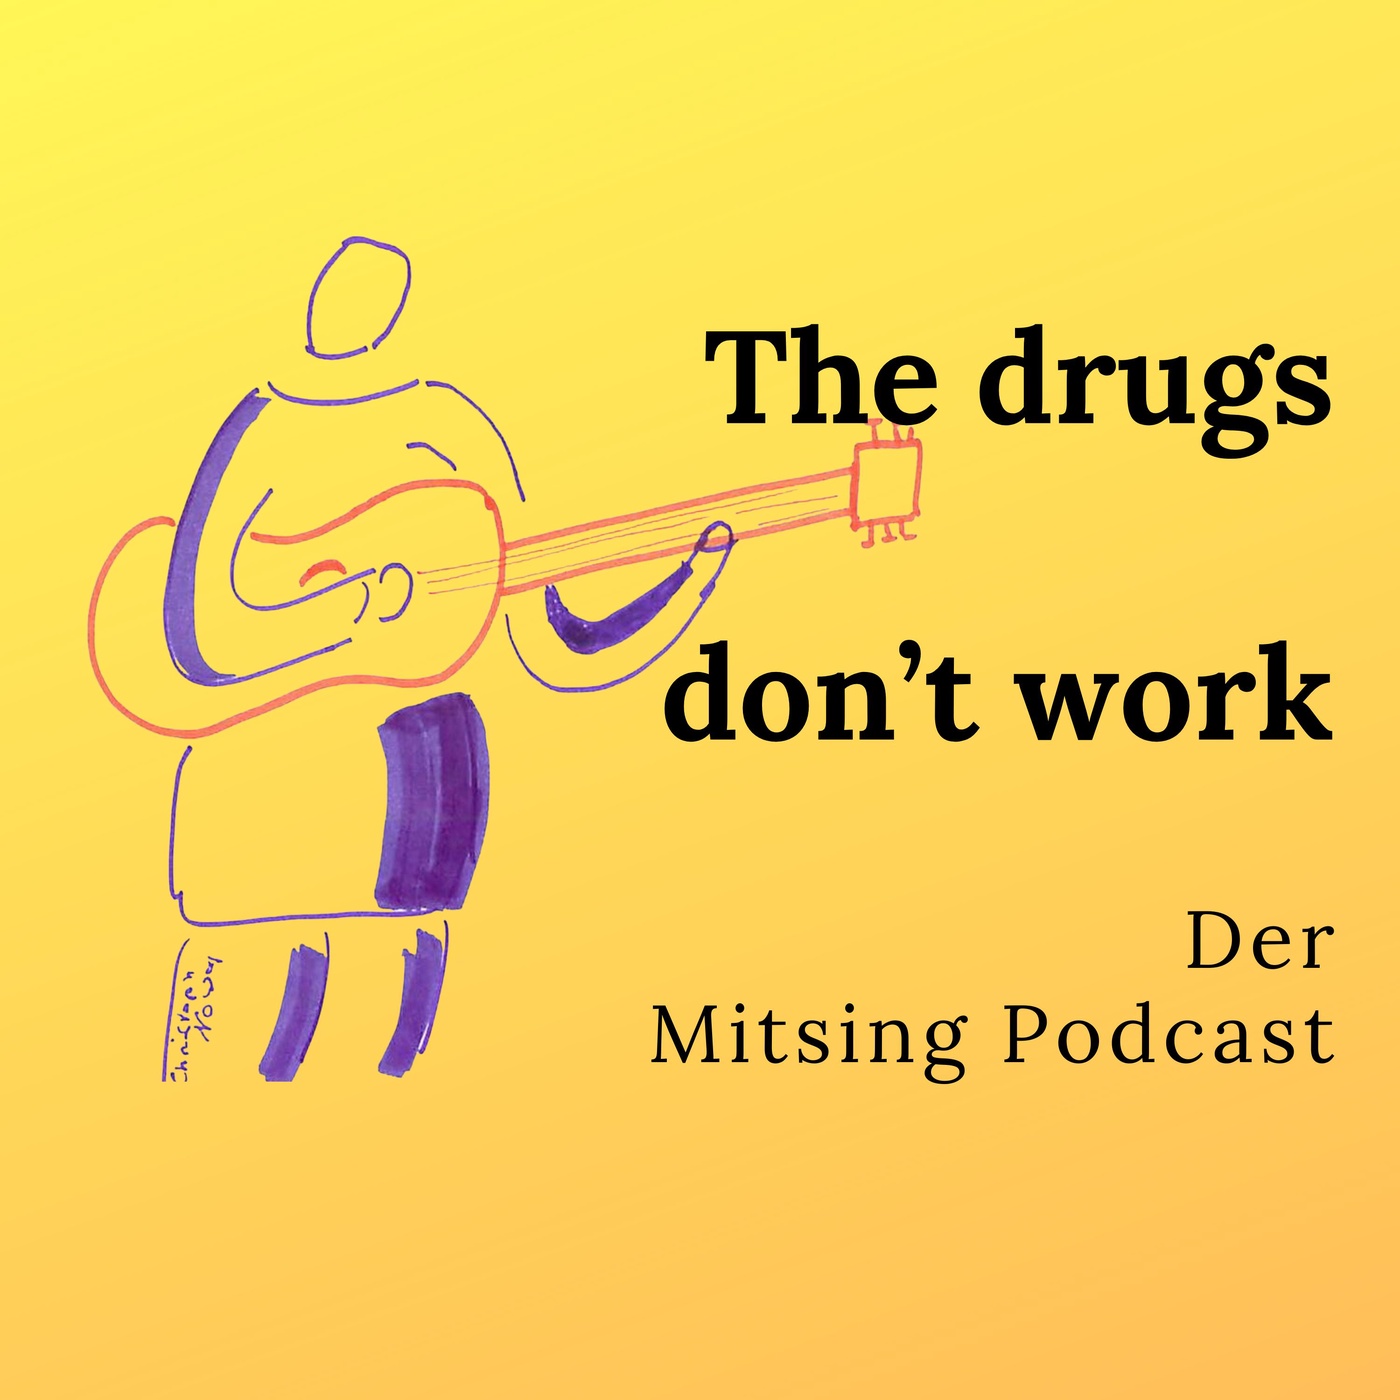 The drugs don't work